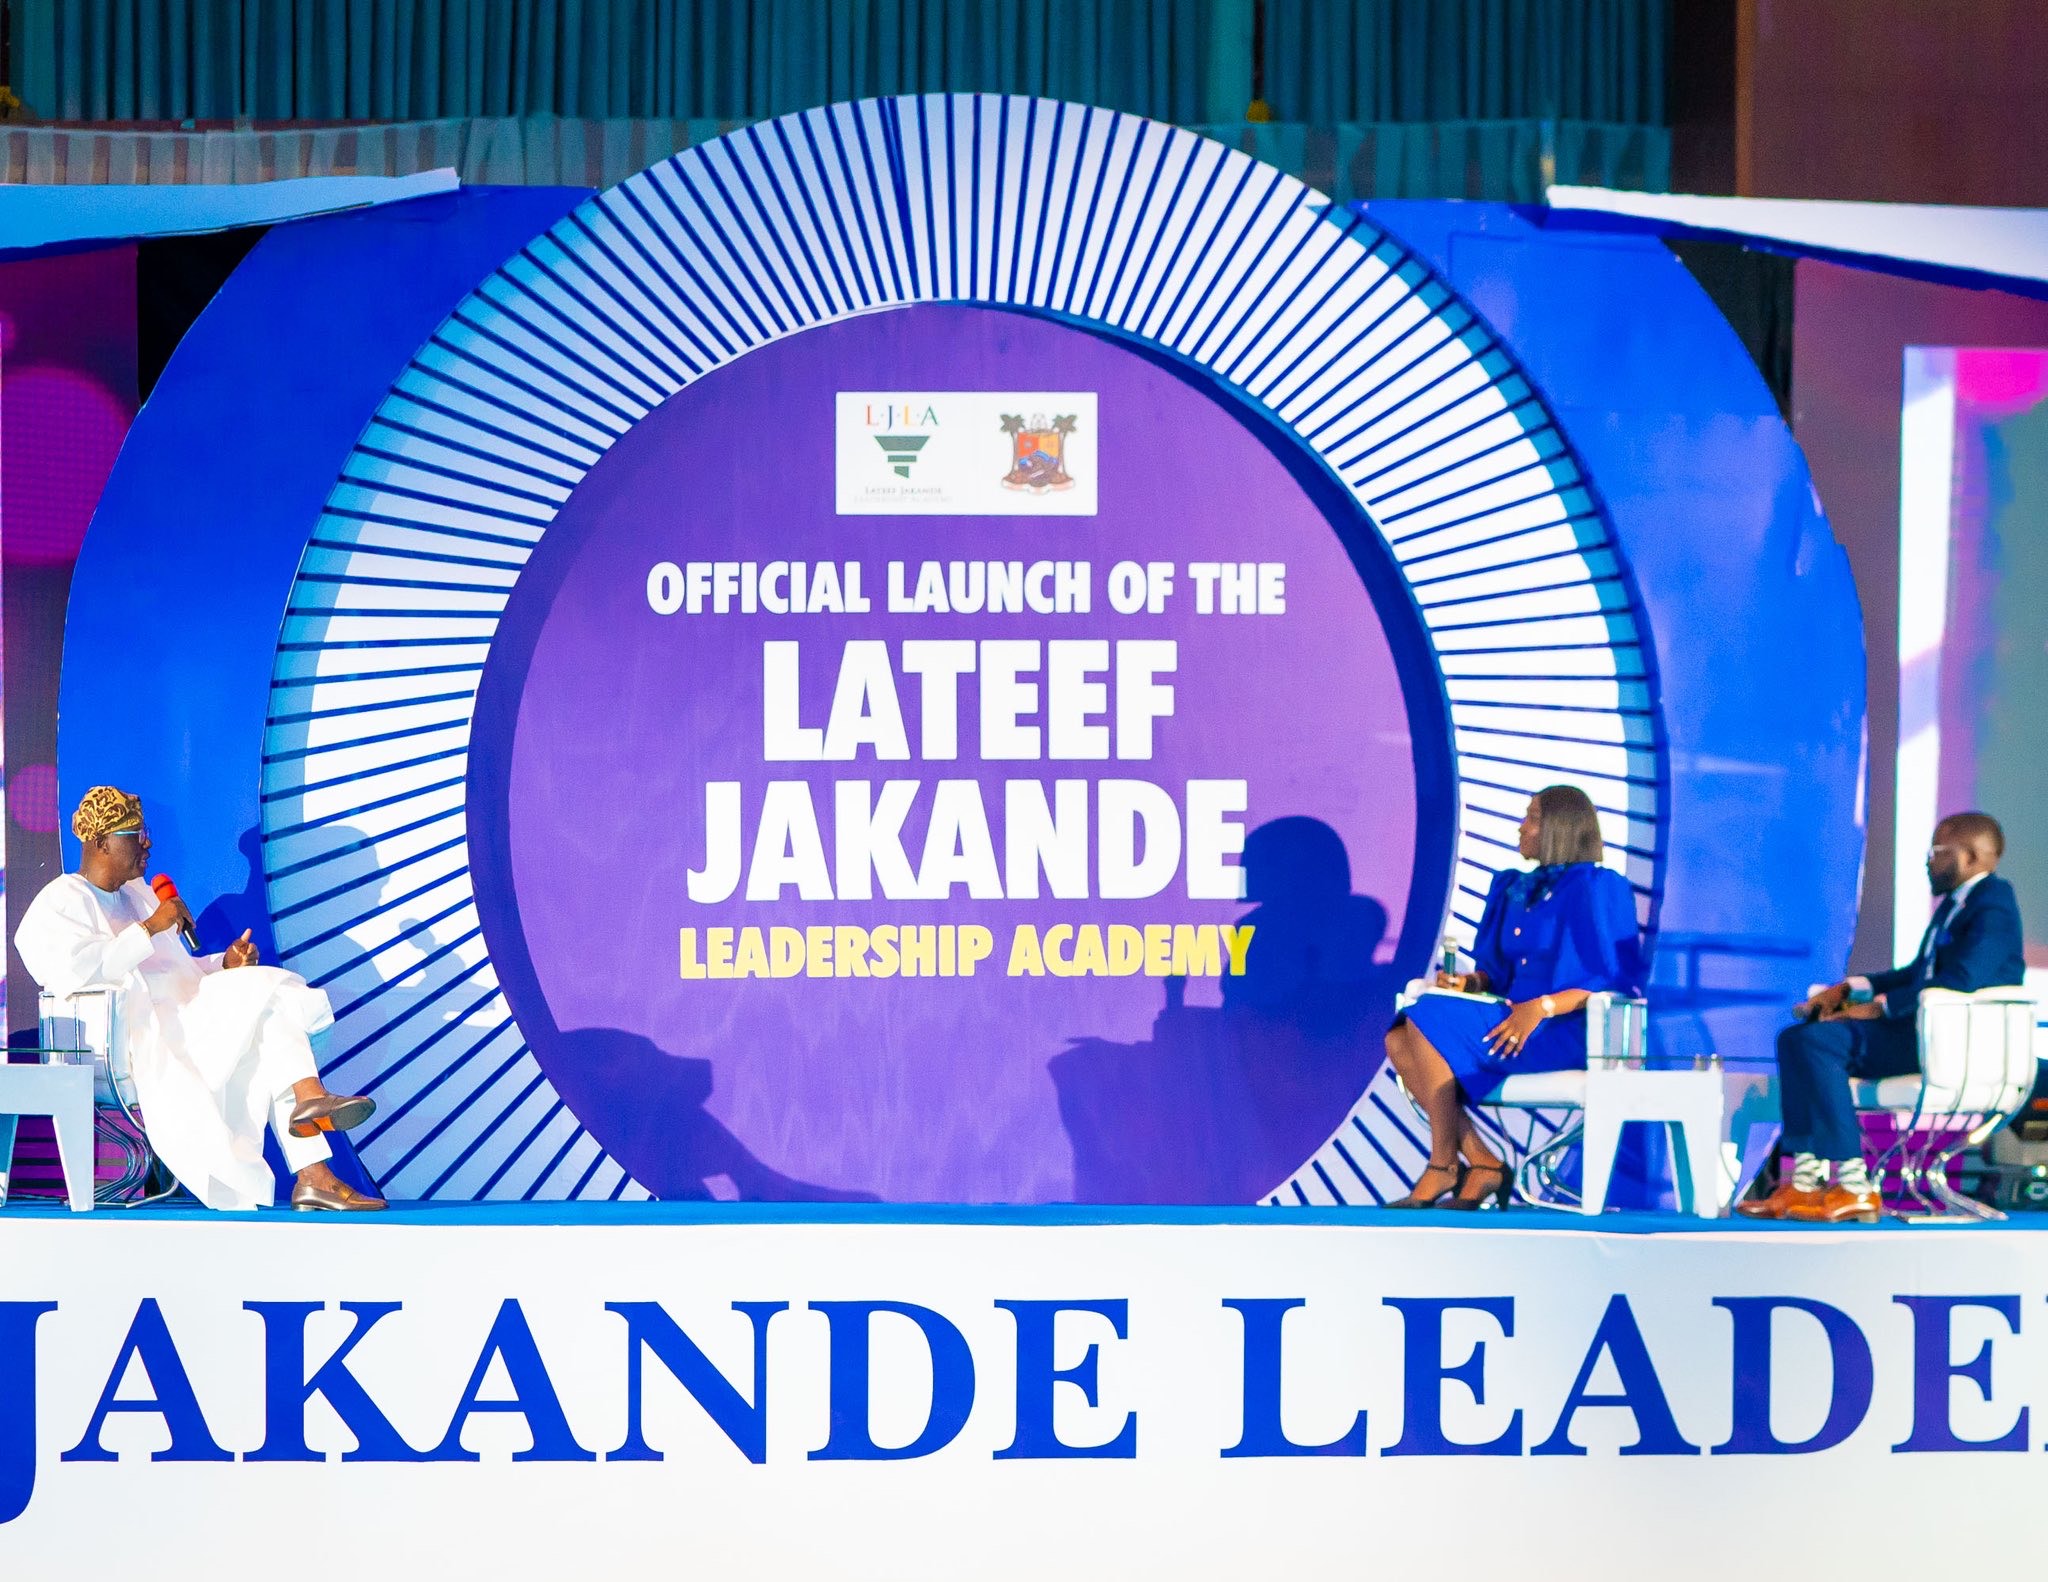 Lagos state governor inducts 30 pioneer fellows into Jakande Leadership Academy, how to apply